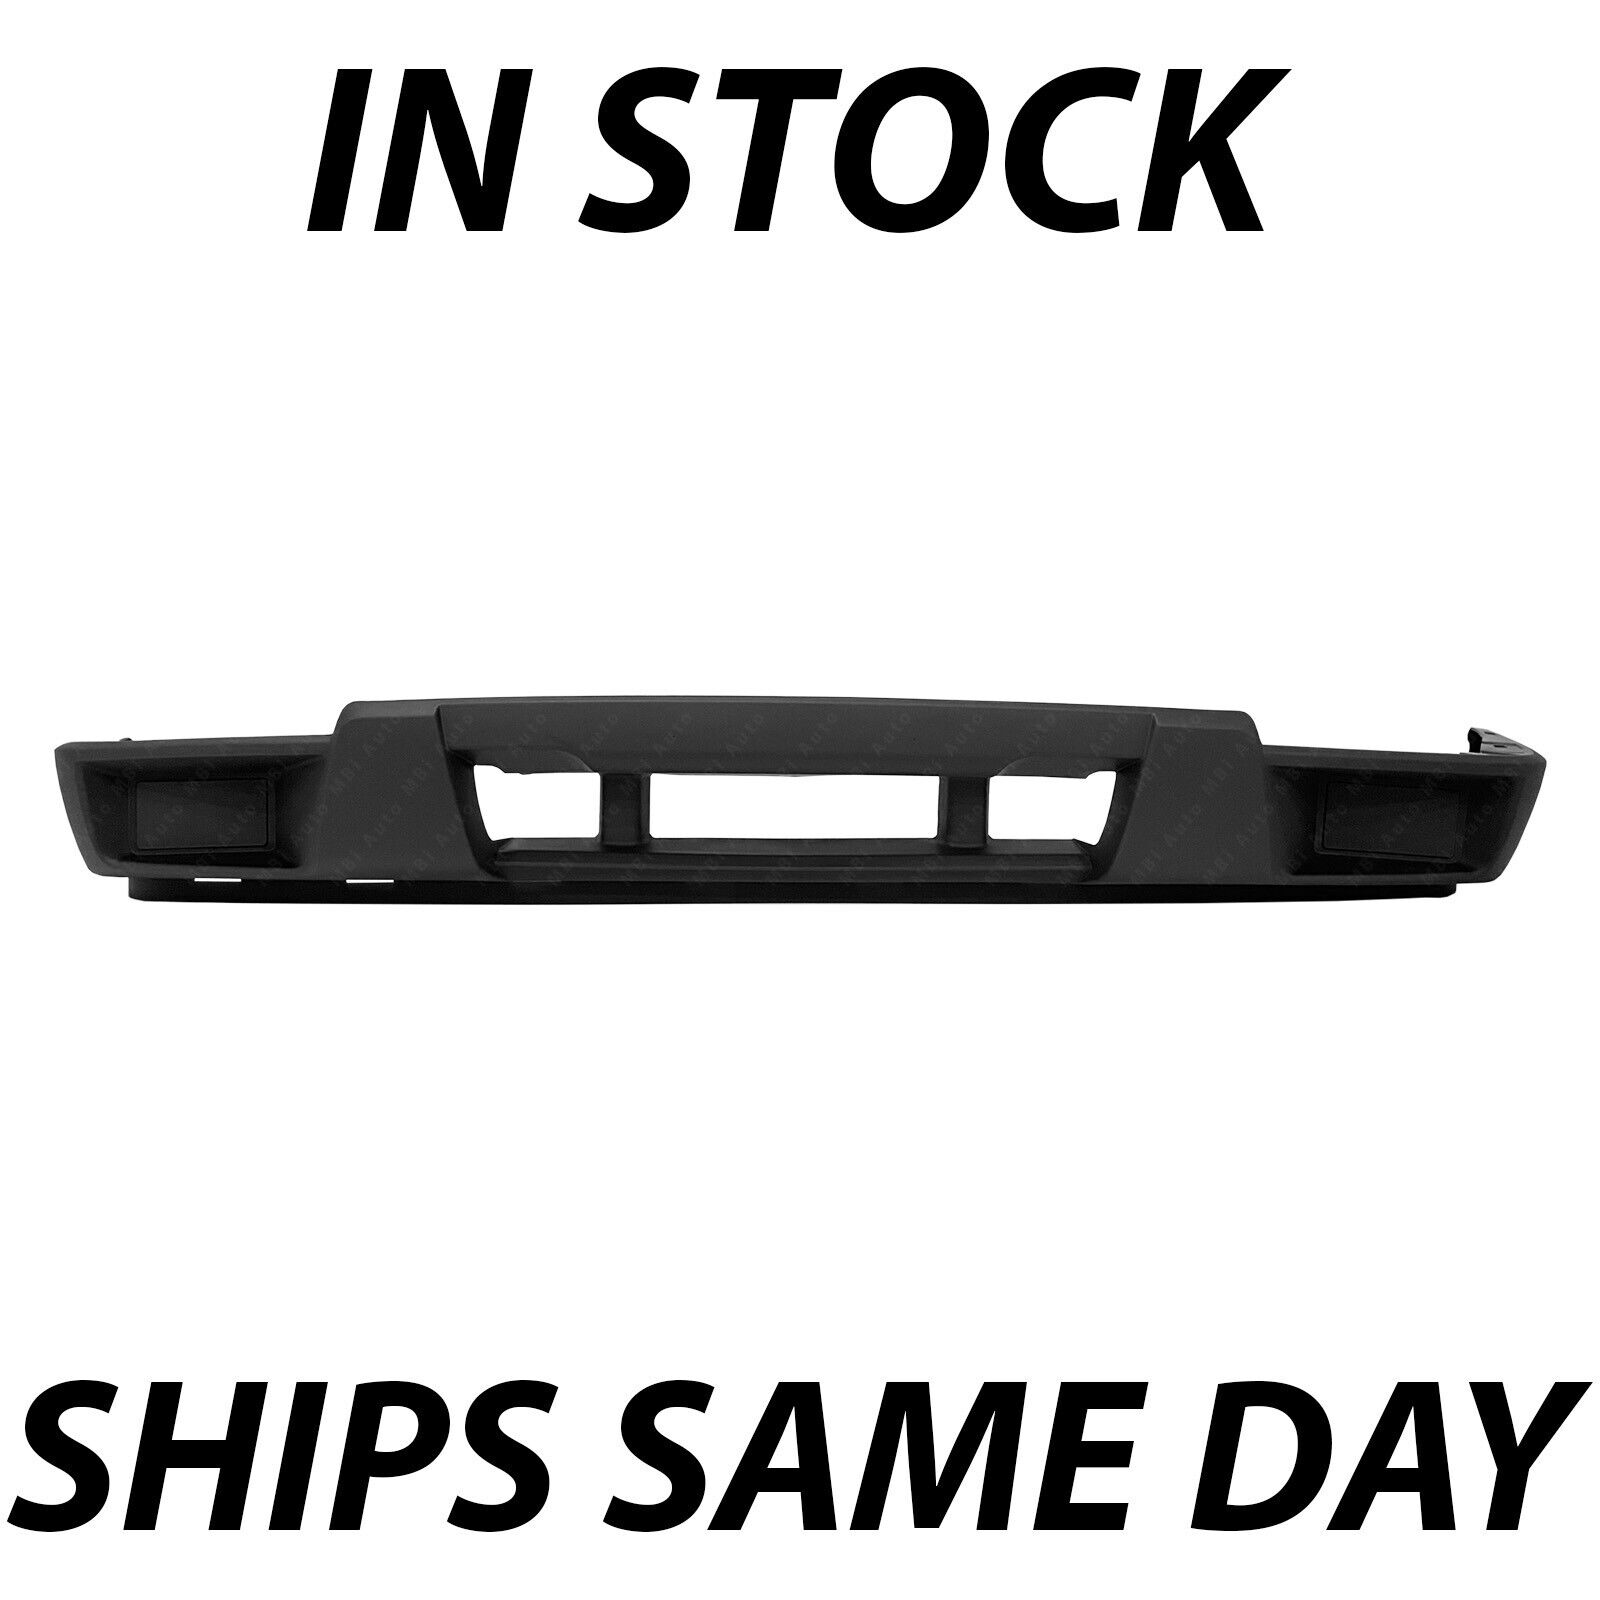 NEW Lower Front Bumper Replacement for 2004-2012 GMC Canyon Chevy Colorado 04-12